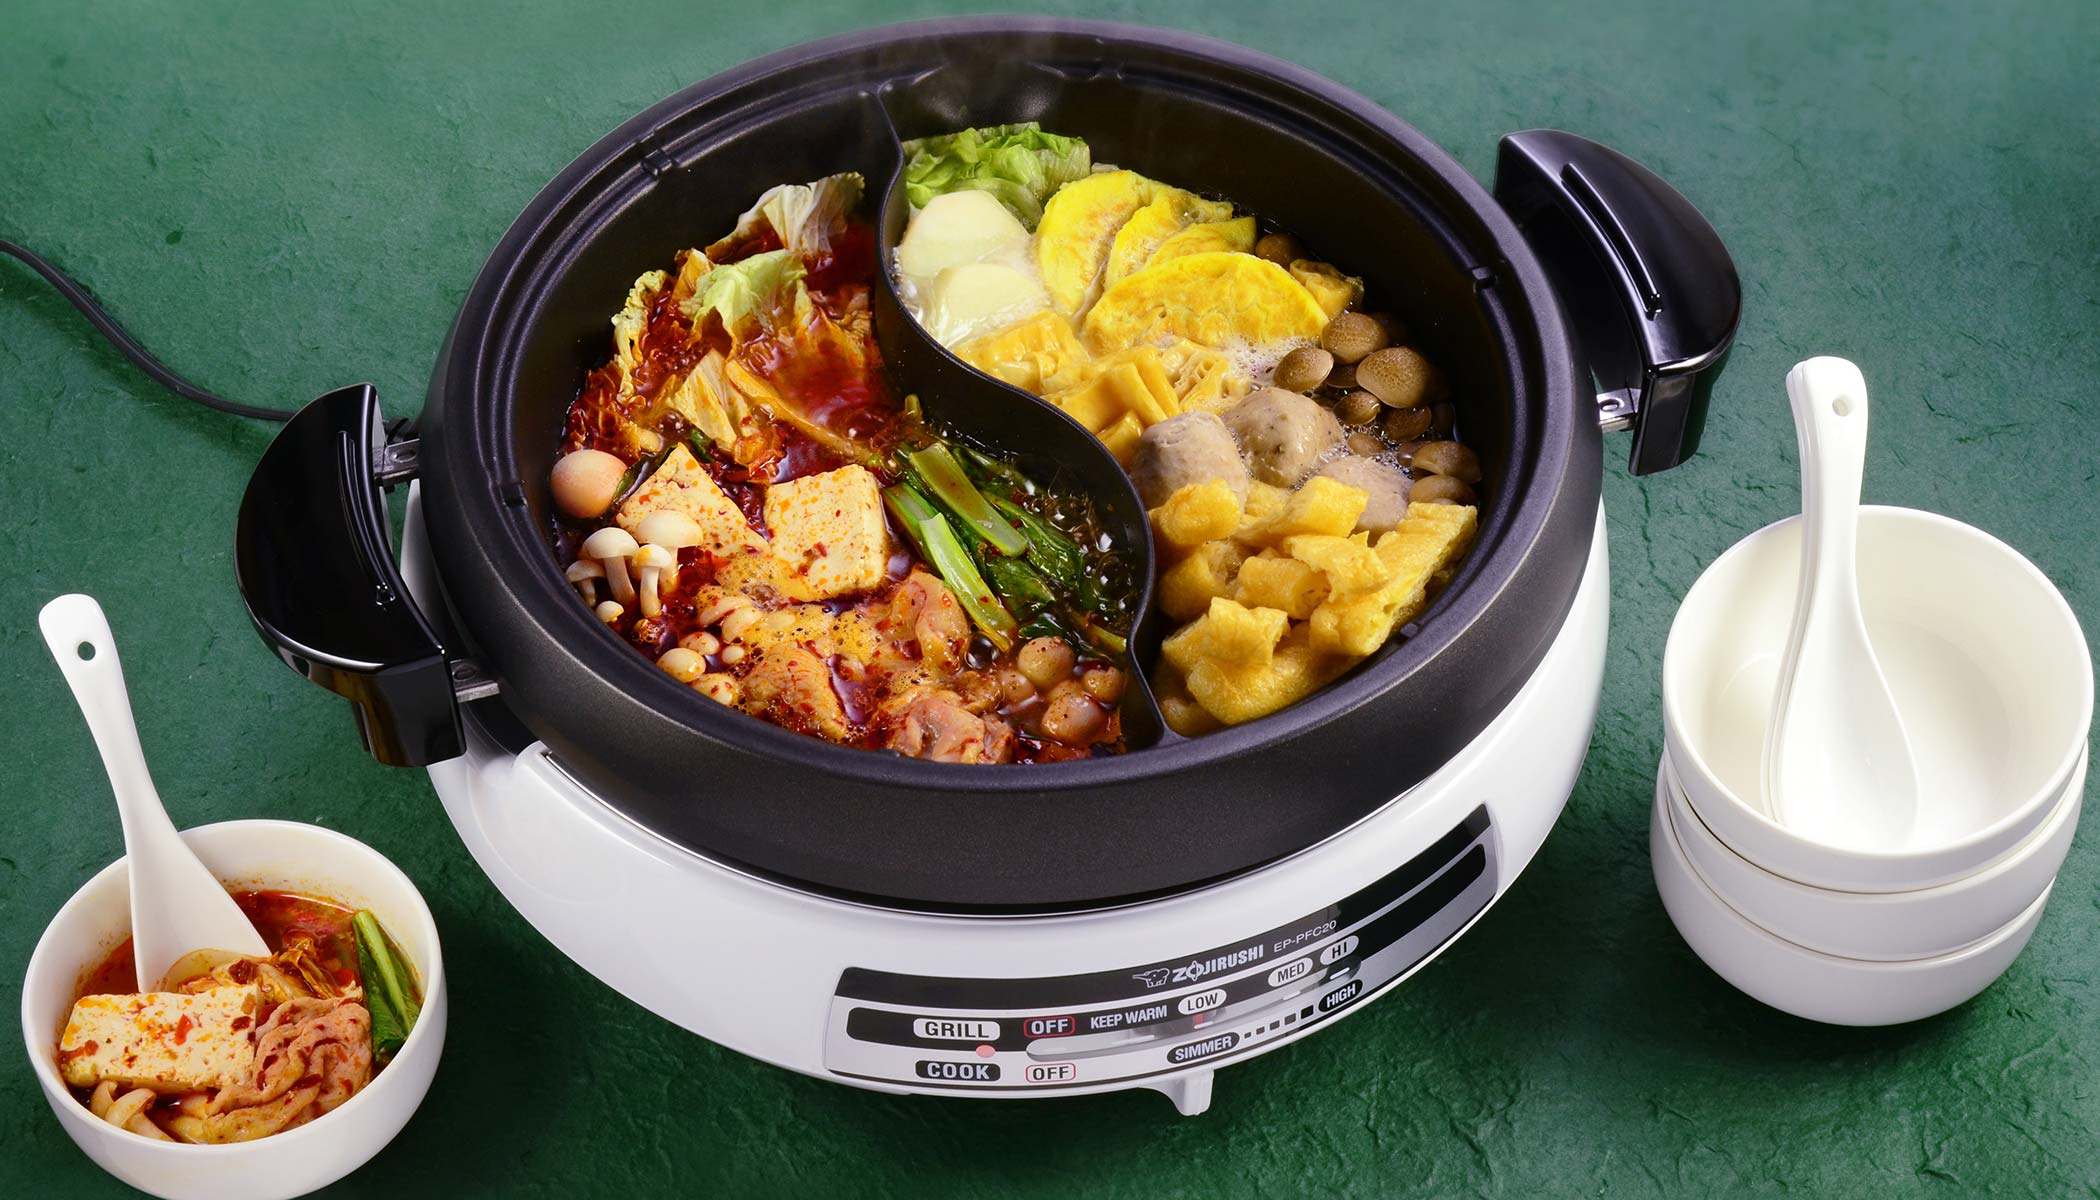 Zojirushi Electric Skillet Hot Pot Giveaway (US & Canada Only